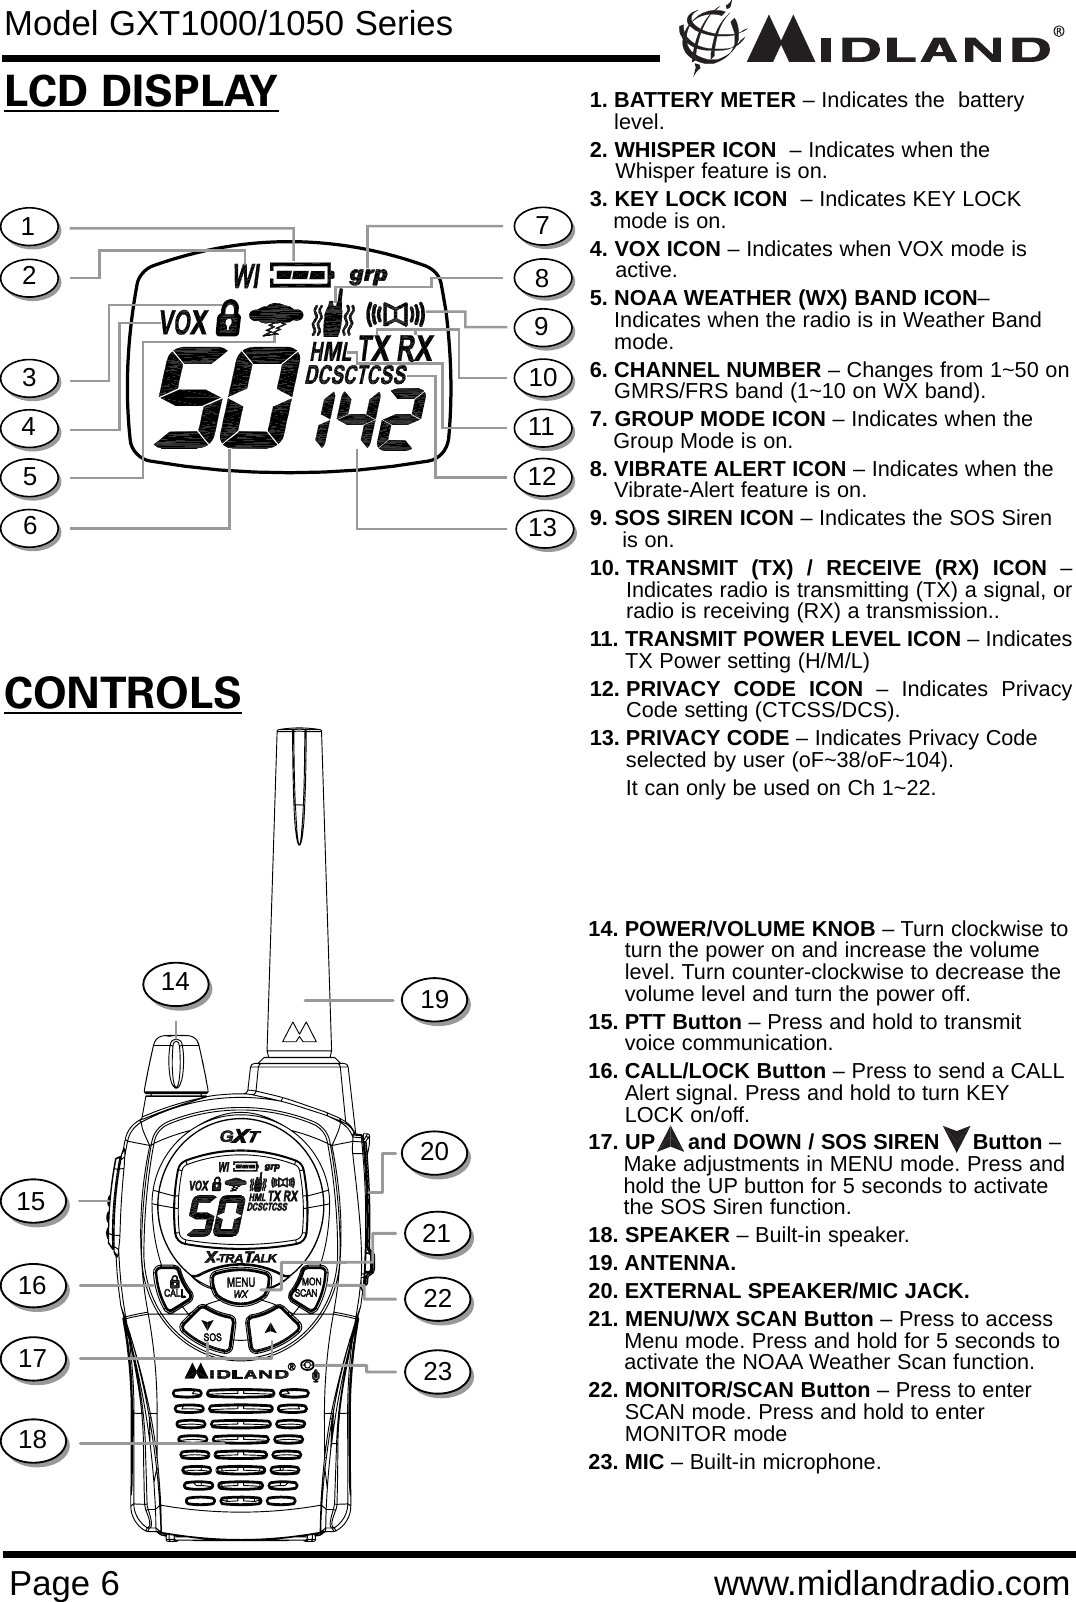 Page 6 www.midlandradio.comCONTROLSLCD DISPLAY1. BATTERY METER – Indicates the  batterylevel.2. WHISPER ICON  – Indicates when the Whisper feature is on. 3. KEY LOCK ICON  – Indicates KEY LOCK mode is on.4. VOX ICON – Indicates when VOX mode is active.5. NOAA WEATHER (WX) BAND ICON– Indicates when the radio is in Weather Bandmode.6. CHANNEL NUMBER – Changes from 1~50 onGMRS/FRS band (1~10 on WX band).7. GROUP MODE ICON – Indicates when the Group Mode is on.  8. VIBRATE ALERT ICON – Indicates when theVibrate-Alert feature is on. 9. SOS SIREN ICON – Indicates the SOS Siren is on.10. TRANSMIT (TX) / RECEIVE (RX) ICON –Indicates radio is transmitting (TX) a signal, orradio is receiving (RX) a transmission..11. TRANSMIT POWER LEVEL ICON – IndicatesTX Power setting (H/M/L)12. PRIVACY CODE ICON – Indicates PrivacyCode setting (CTCSS/DCS).13. PRIVACY CODE – Indicates Privacy Code selected by user (oF~38/oF~104).It can only be used on Ch 1~22.14. POWER/VOLUME KNOB – Turn clockwise toturn the power on and increase the volumelevel. Turn counter-clockwise to decrease thevolume level and turn the power off.15. PTT Button – Press and hold to transmitvoice communication. 16. CALL/LOCK Button – Press to send a CALLAlert signal. Press and hold to turn KEYLOCK on/off.17. UP and DOWN / SOS SIREN     Button – Make adjustments in MENU mode. Press and hold the UP button for 5 seconds to activate the SOS Siren function.18. SPEAKER – Built-in speaker.19. ANTENNA.20. EXTERNAL SPEAKER/MIC JACK.21. MENU/WX SCAN Button – Press to access Menu mode. Press and hold for 5 seconds to activate the NOAA Weather Scan function.22. MONITOR/SCAN Button – Press to enterSCAN mode. Press and hold to enterMONITOR mode23. MIC – Built-in microphone.12345678914151617182322212019Model GXT1000/1050 Series10111213